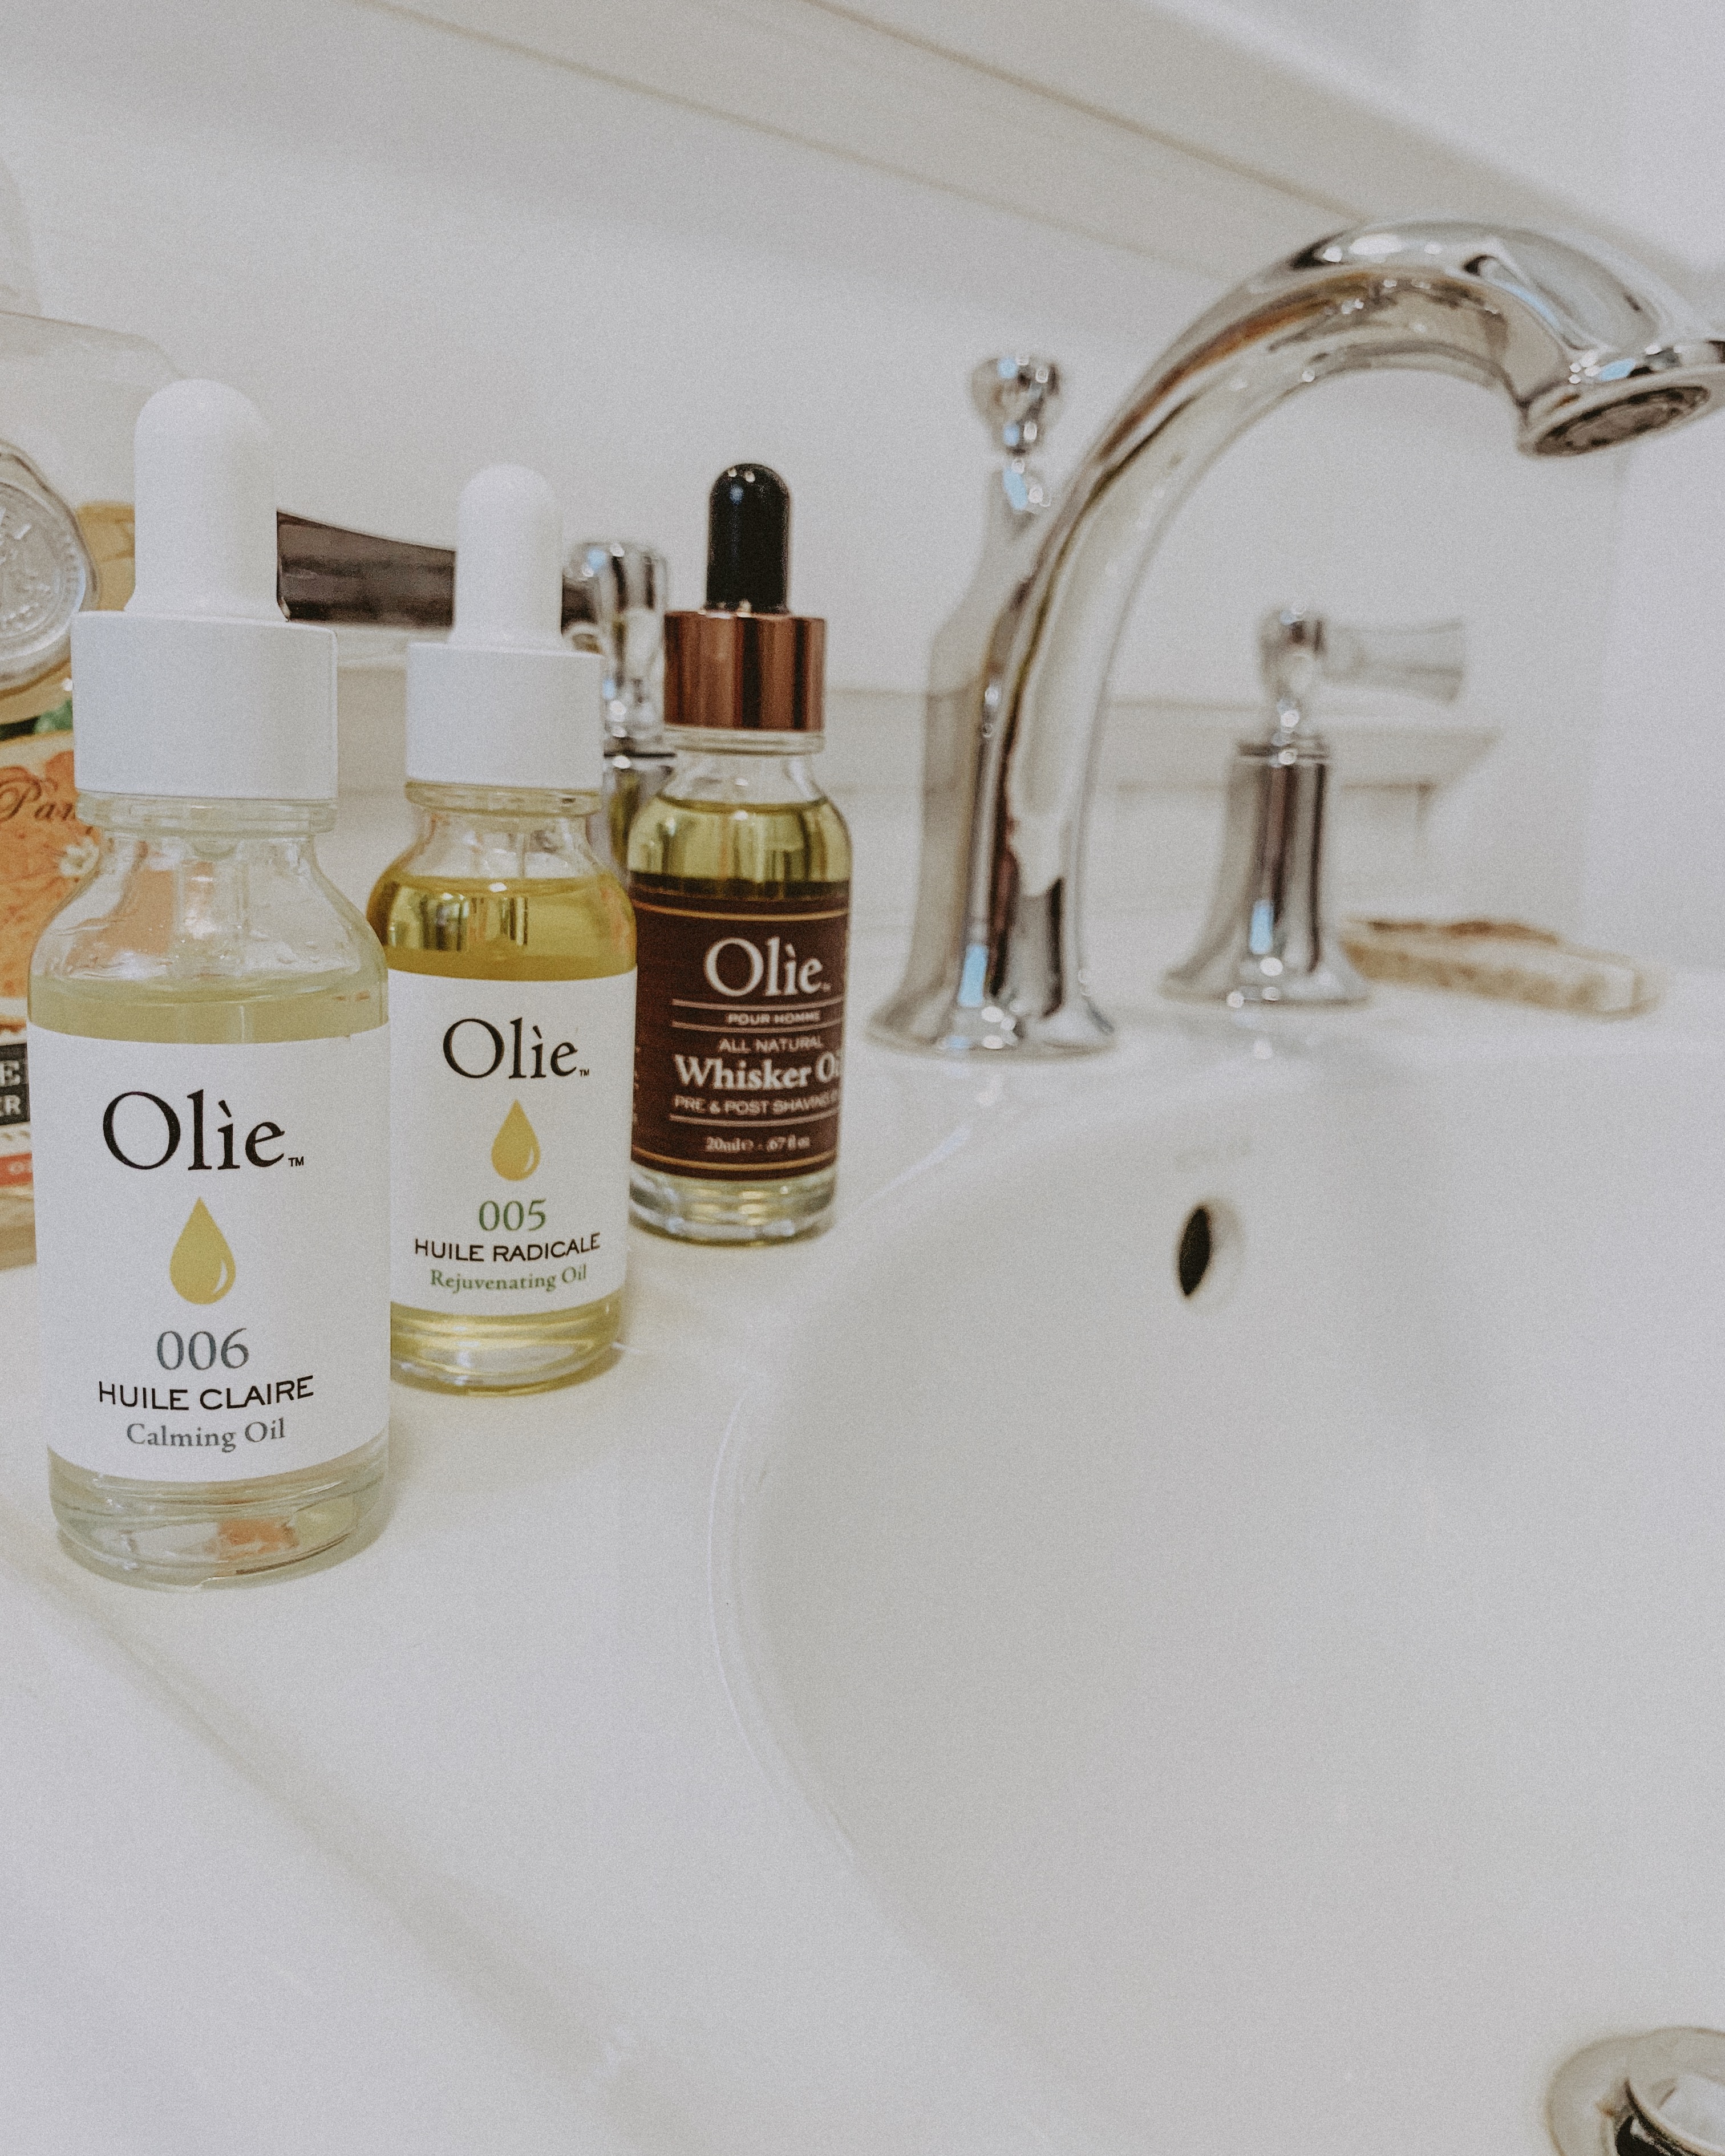 How To Prep Your Skin For Fall With Olie Face Oils - Skincare - Beauty #skincare #beauty #faceoil #fallskincare #fallbeauty #beautyroutine #skincareroutine #blogger #beautyblogger #review #fall #bathroom 